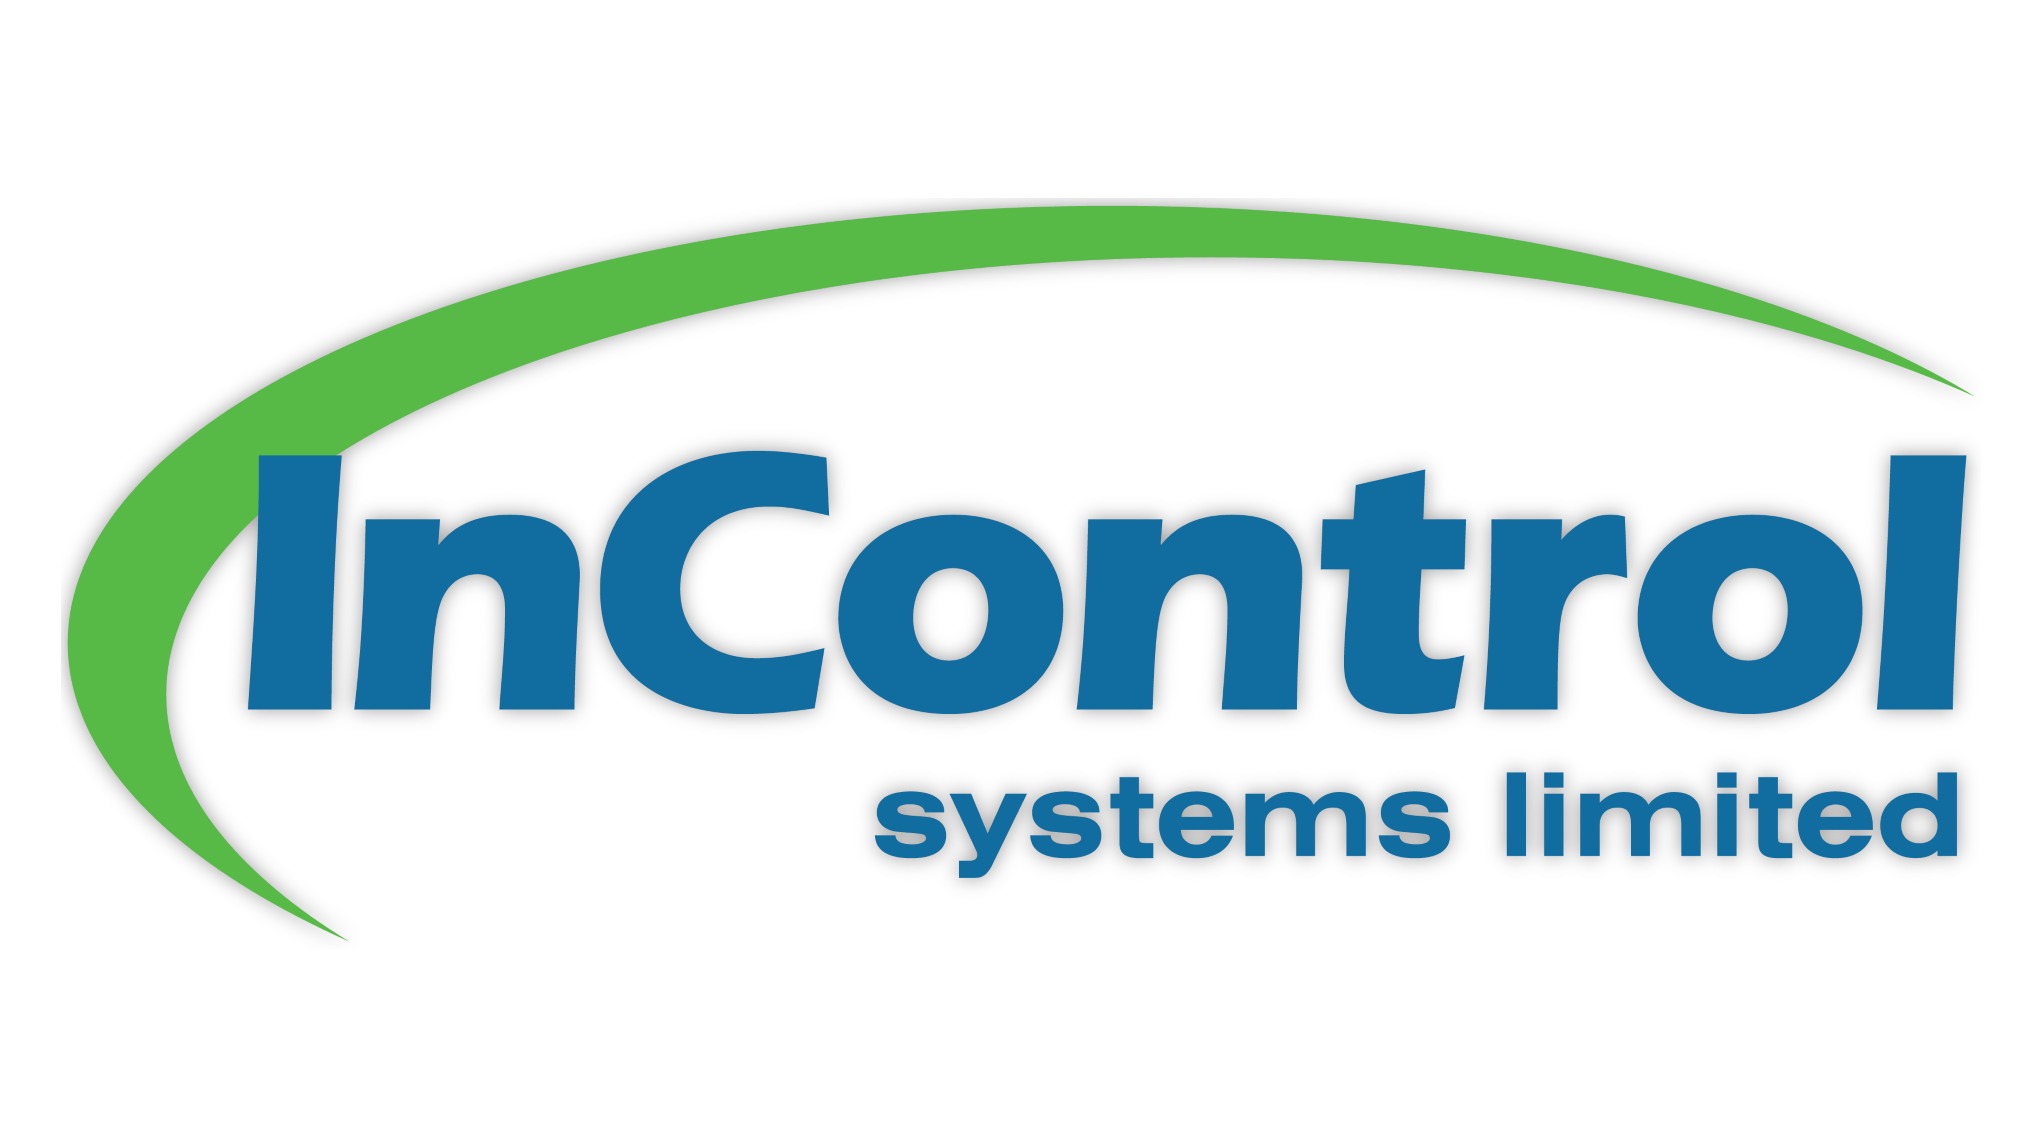 InControl Systems Limited logo blue and green 